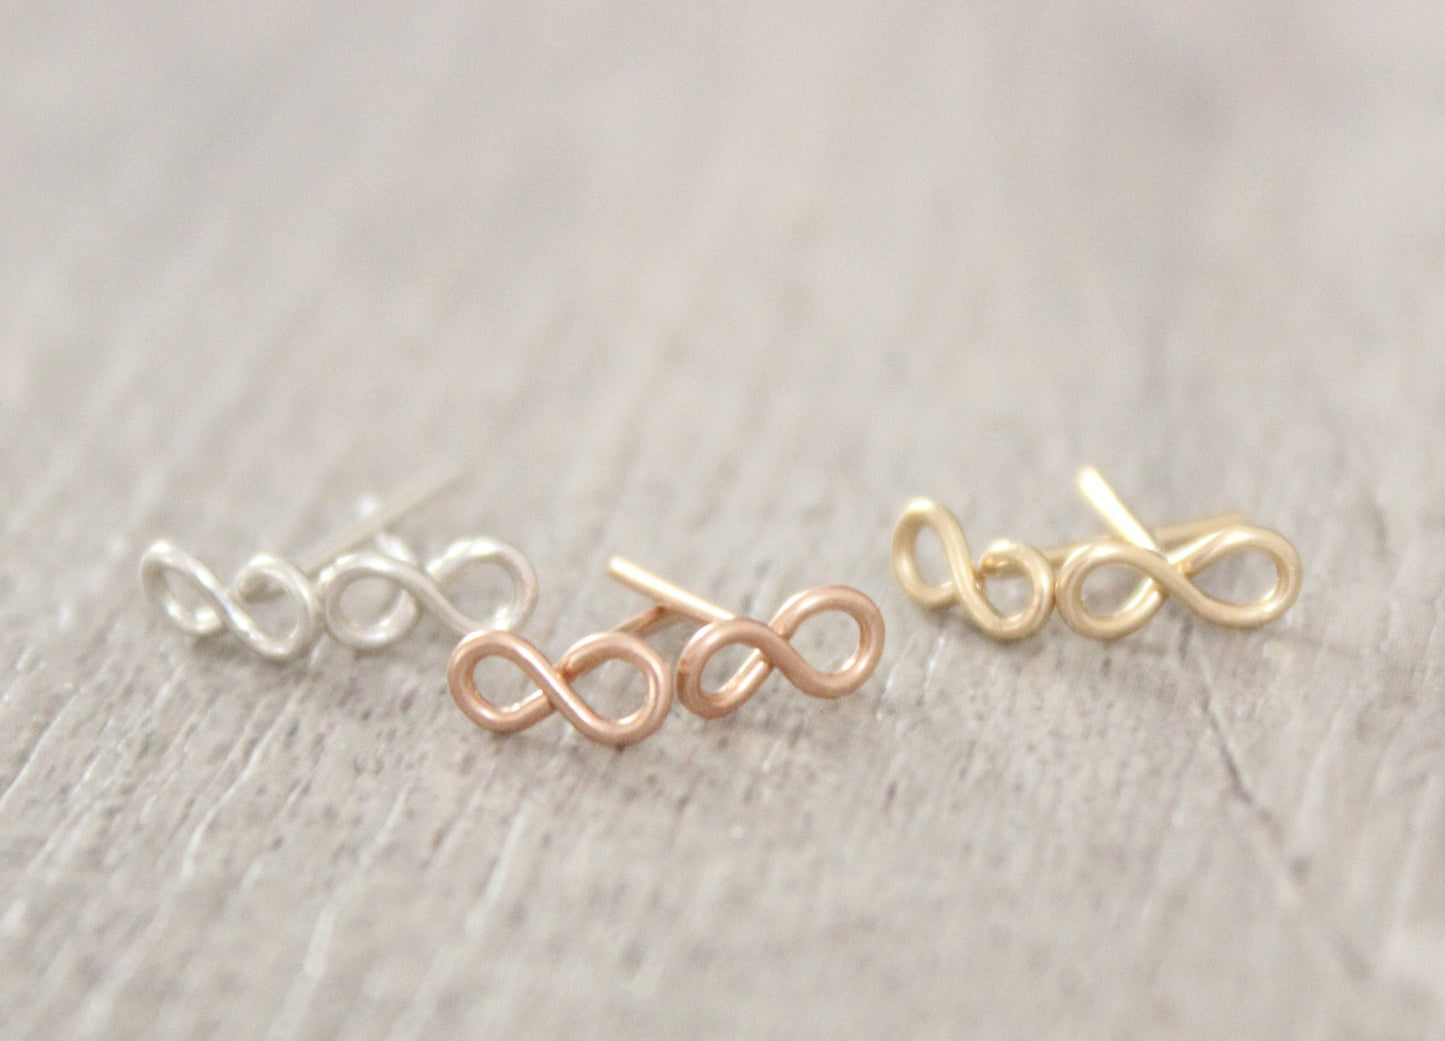 Tiny Gold Infinity Earrings // Gold, Rose Gold or Sterling Silver Infinity Studs // 14K Gold Filled Infinity Stud Earrings // Gift Idea